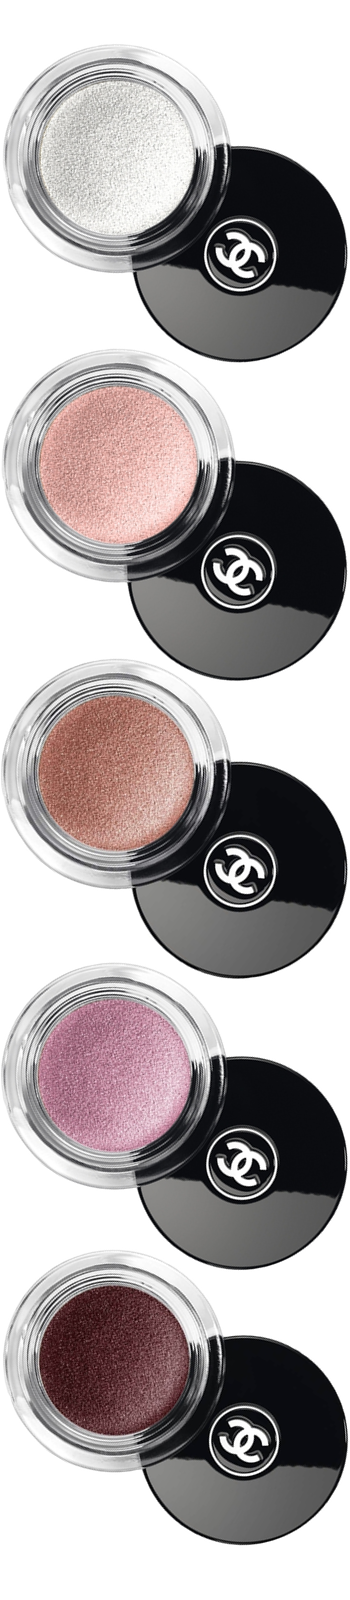 CHANEL ILLUSION D'OMBRE EYESHADOW